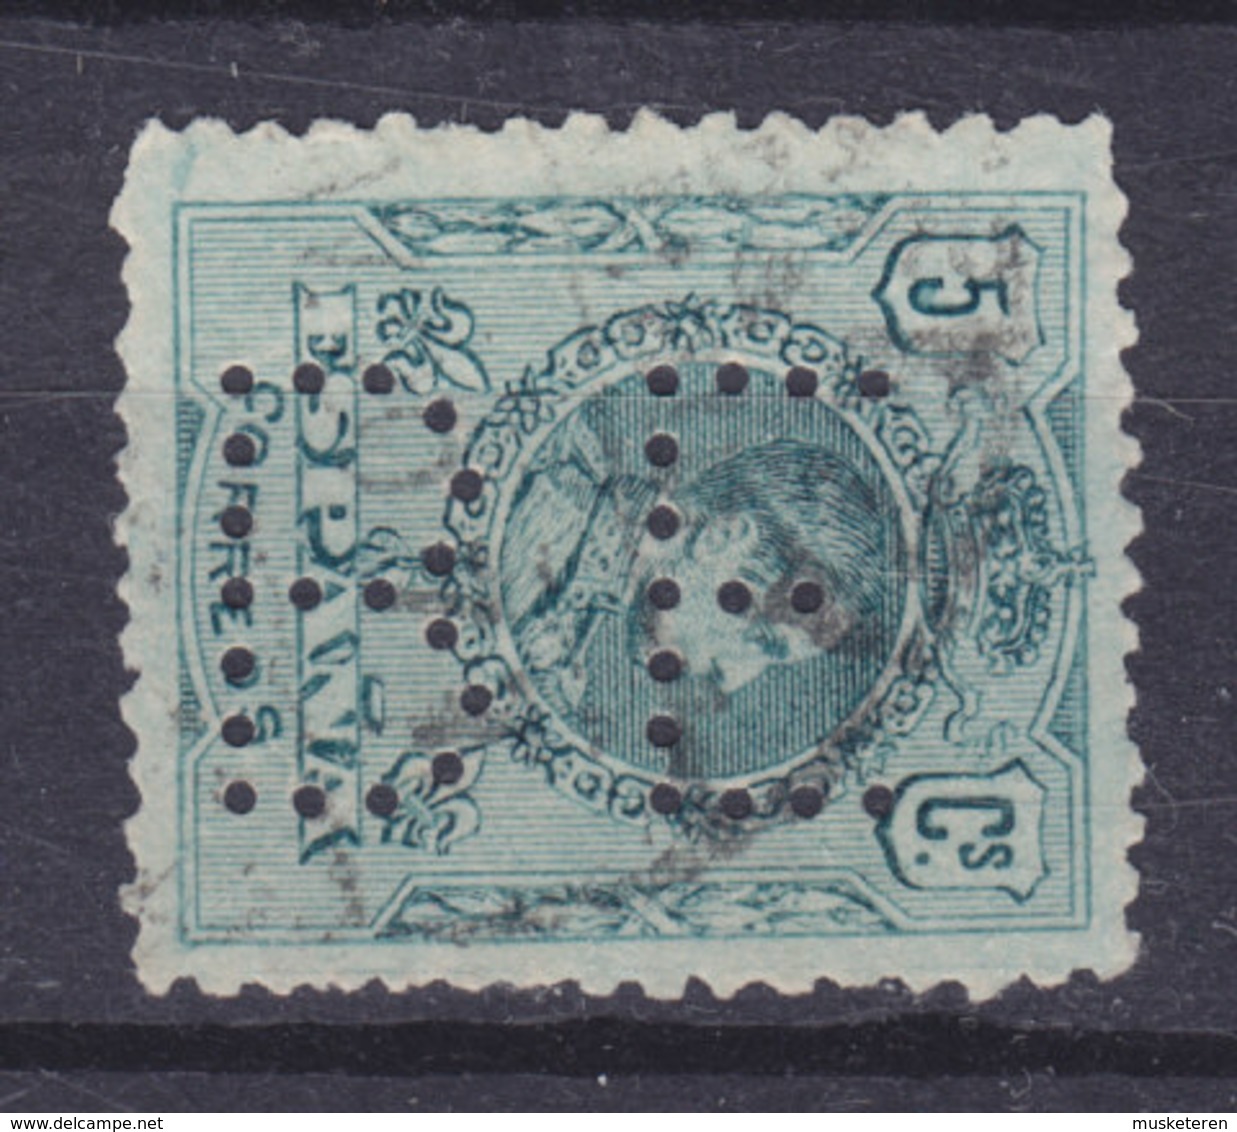 Spain Perfin Perforé Lochung 'BE' 1909 Alfons XIII. Stamp (2 Scans) - Errors & Oddities